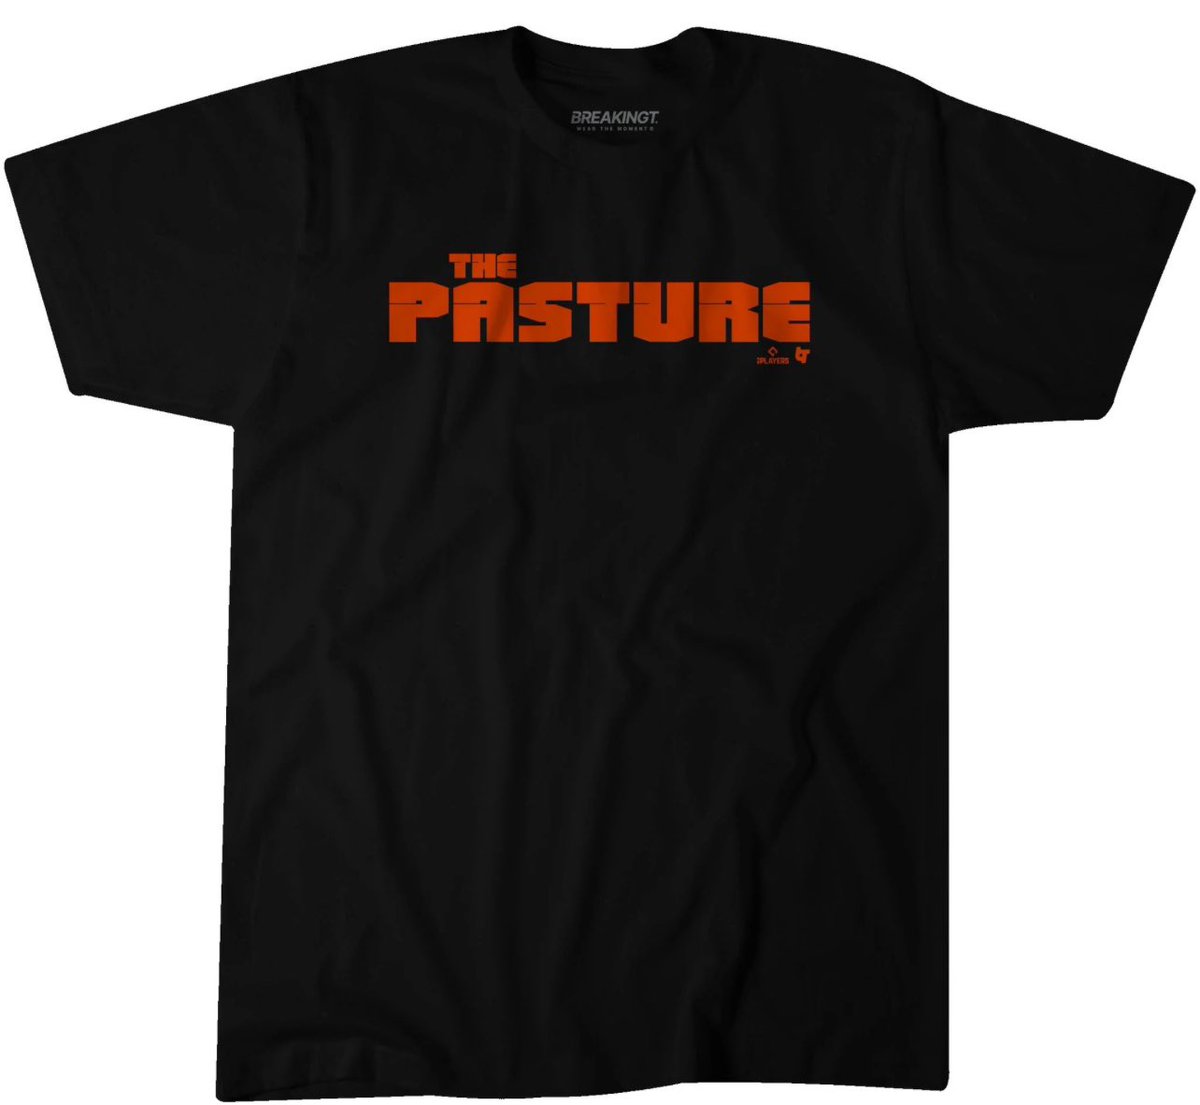 BREAKING: T The legendary @BreakingT has made a shirt for ‘The Pasture’ Whether you’ll be there, want to support or want another comfy shirt, click here: breakingt.com/products/the-p… & use code ‘PASTURE30’ to get 30% off. Don’t wait! This ends MONDAY NIGHT so they can ship in time!